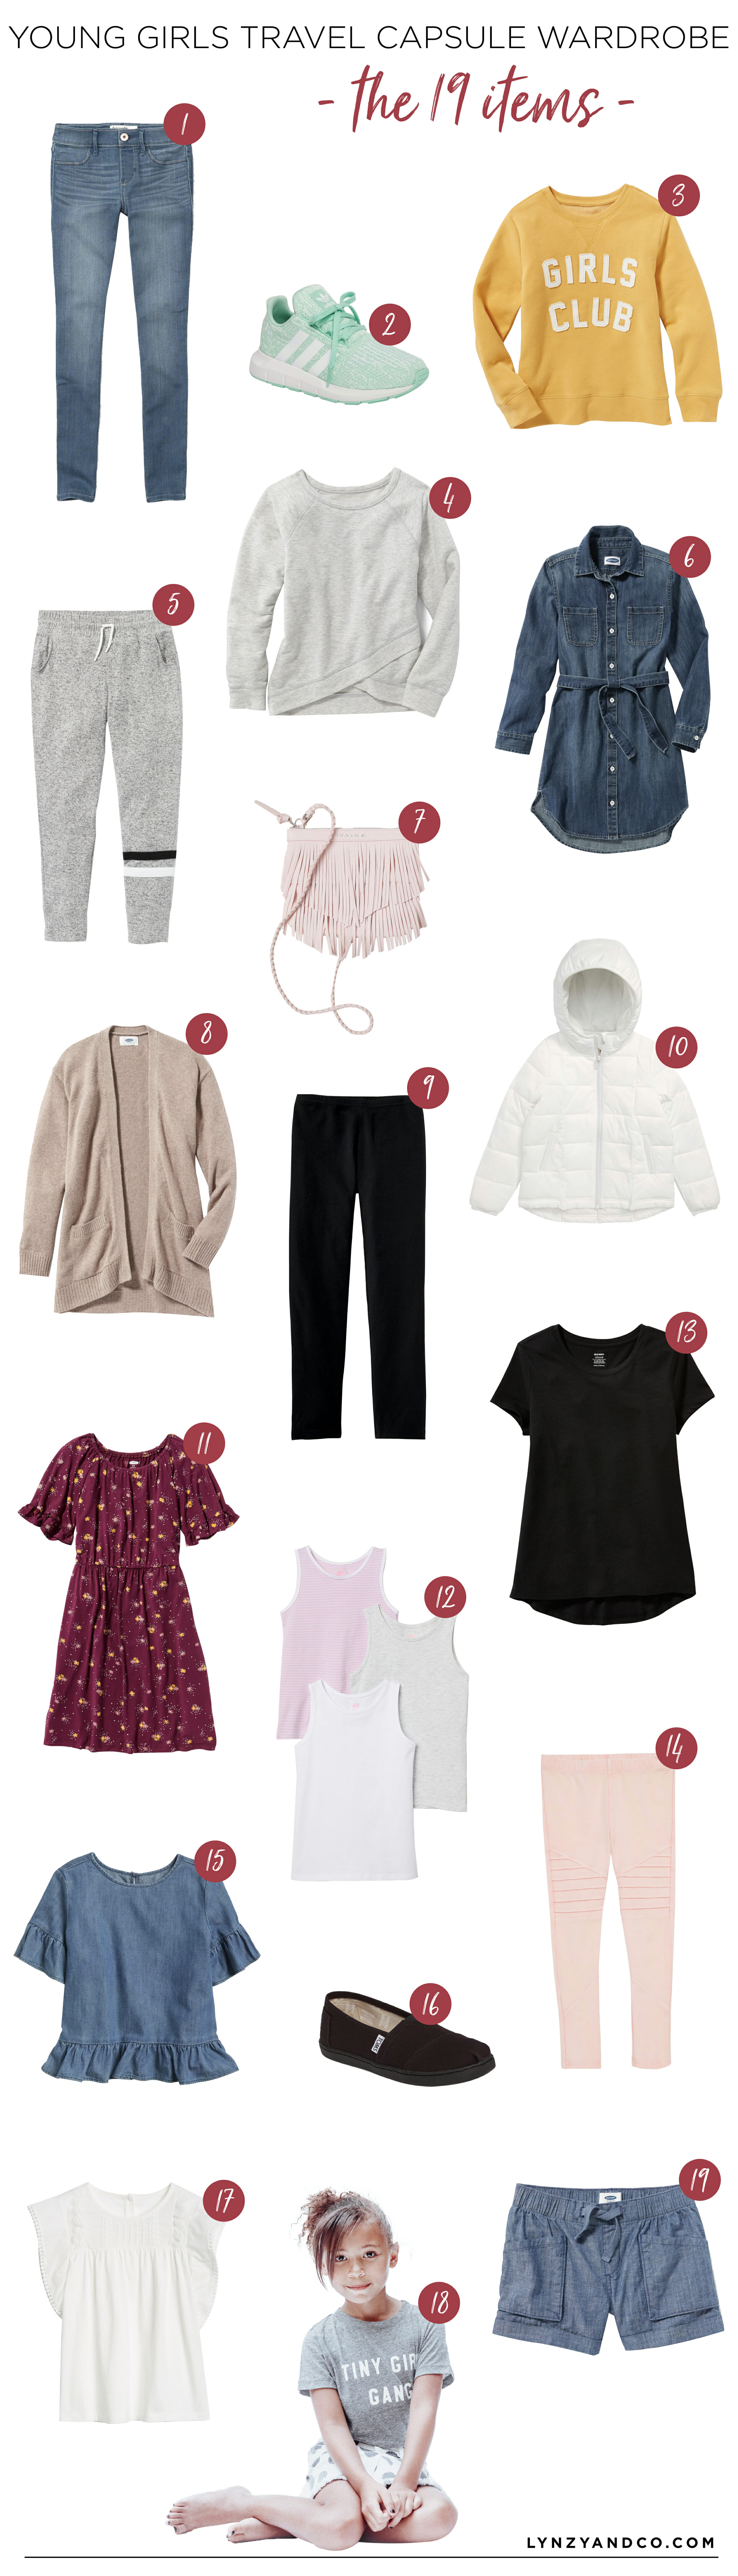 Young Girls Capsule Wardrobe for Travel // Packing for Kids